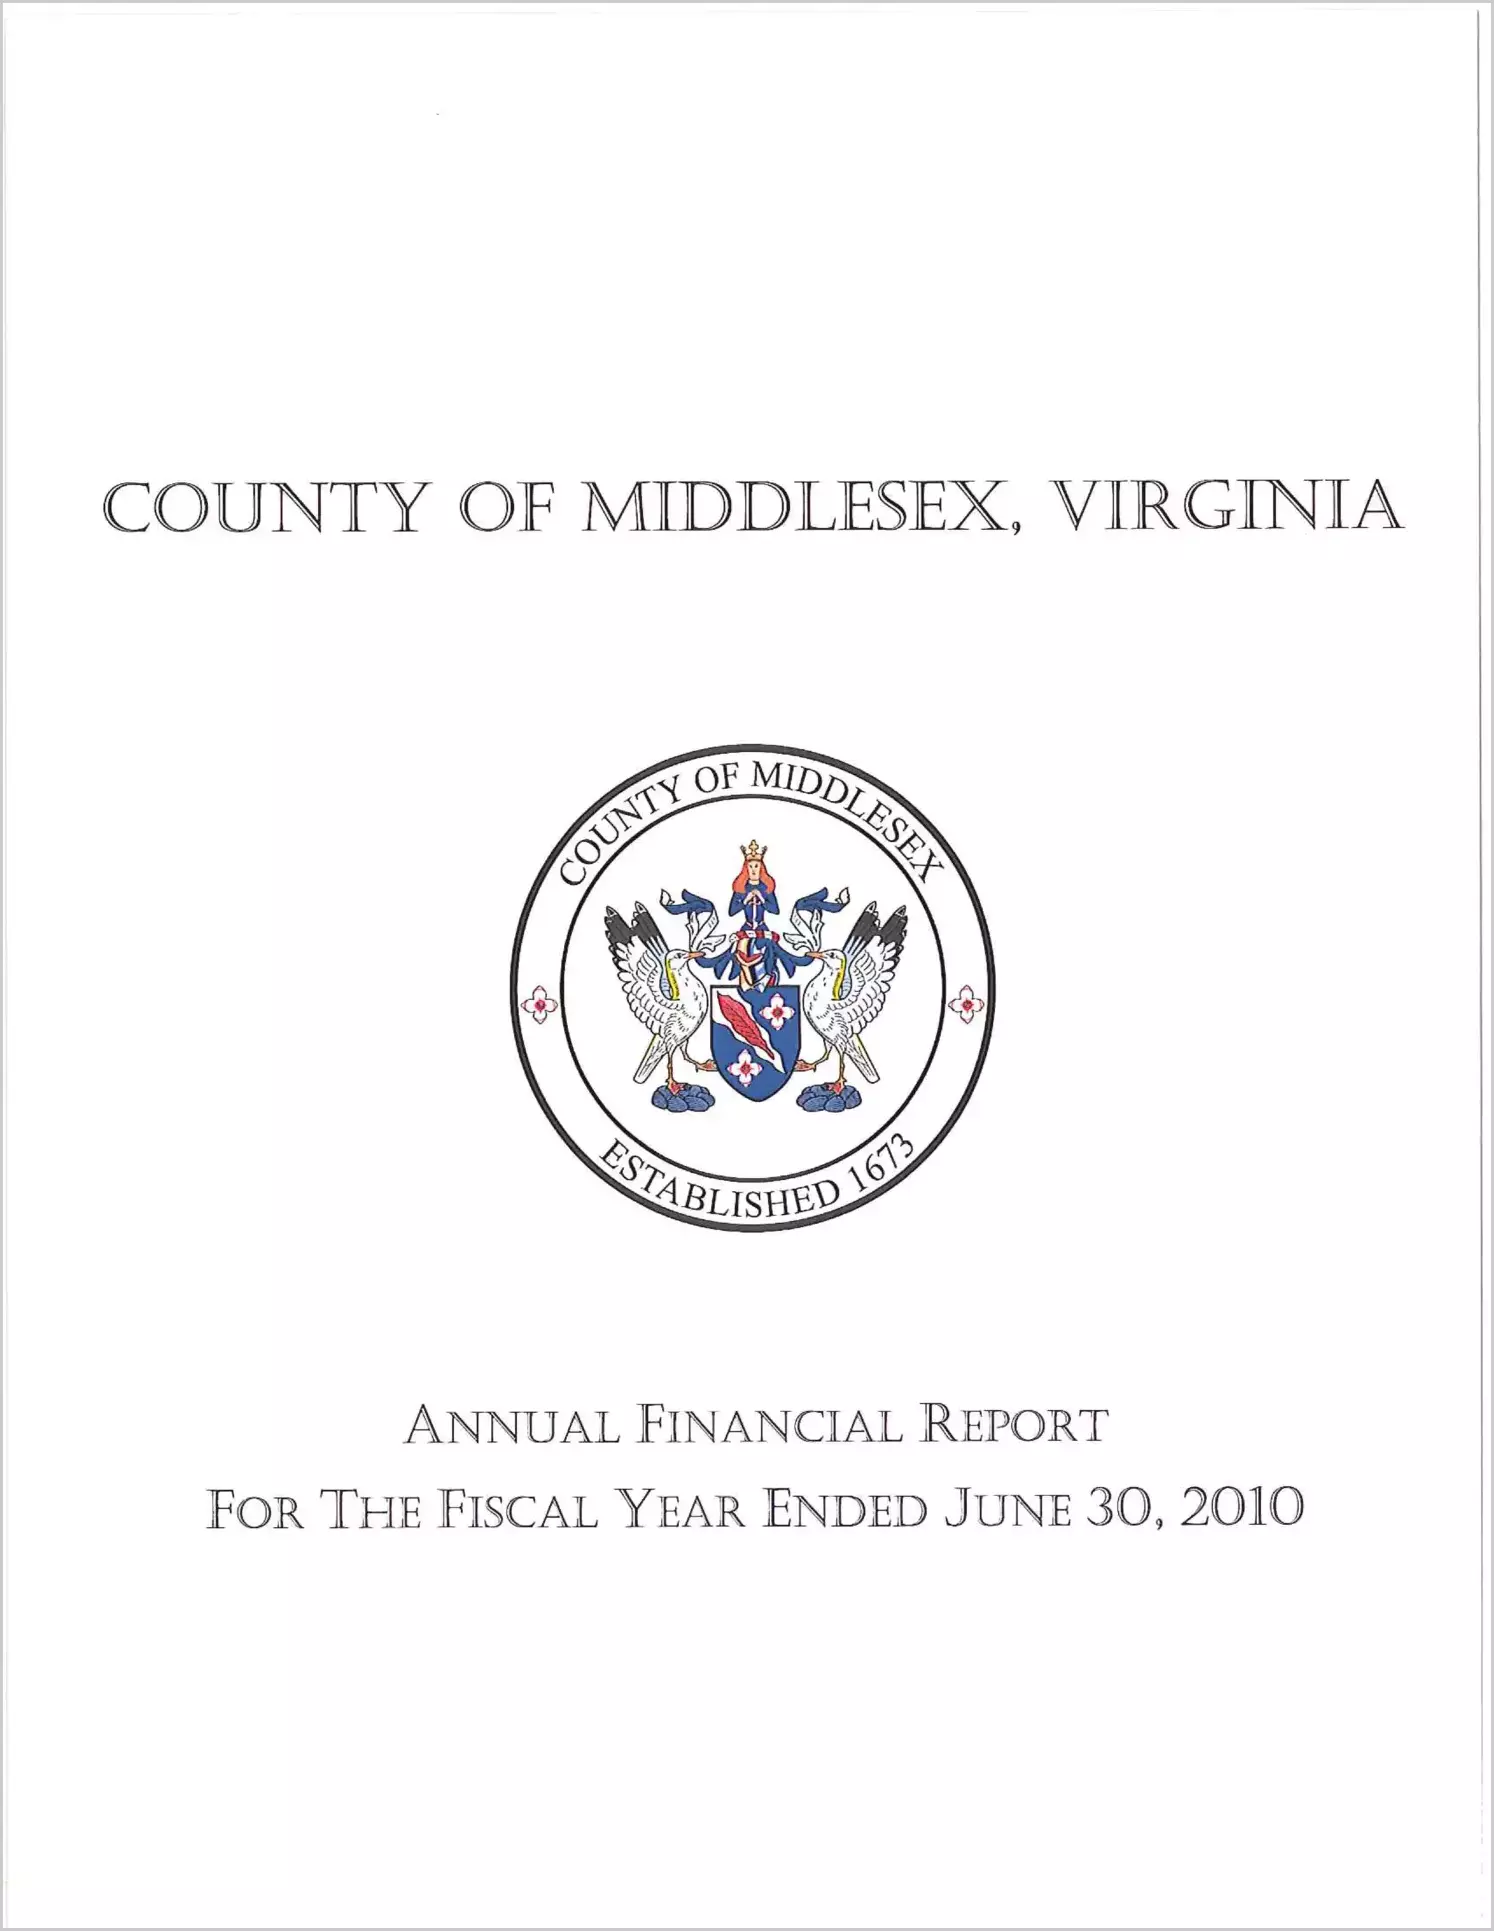 2010 Annual Financial Report for County of Middlesex